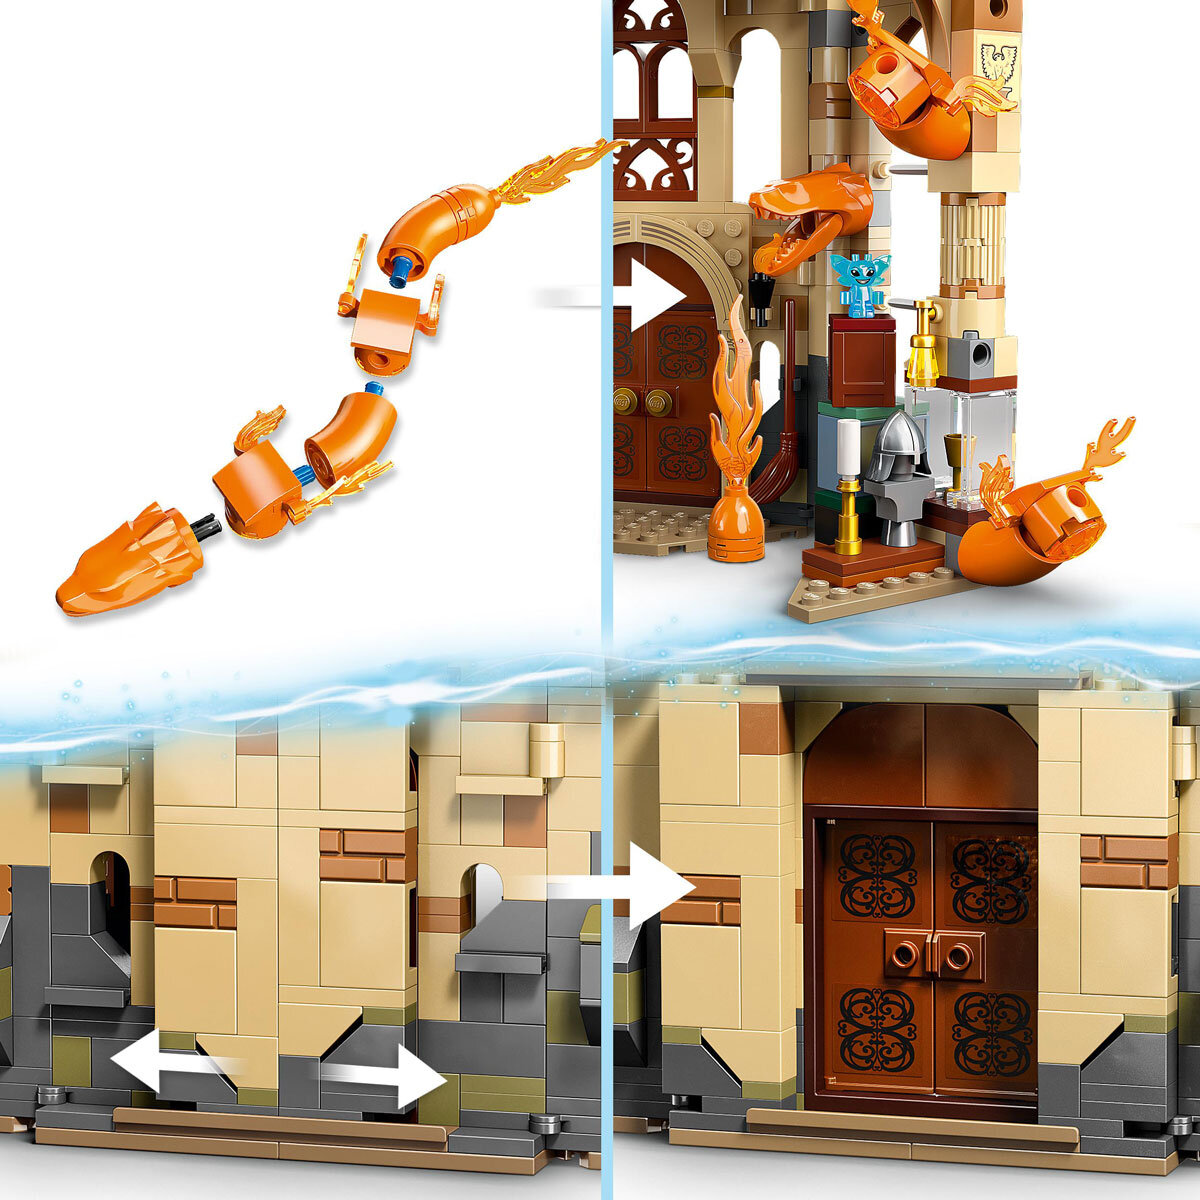 Buy LEGO Hogwarts: Room of Requirement Feature2 Image at Costco.co.uk